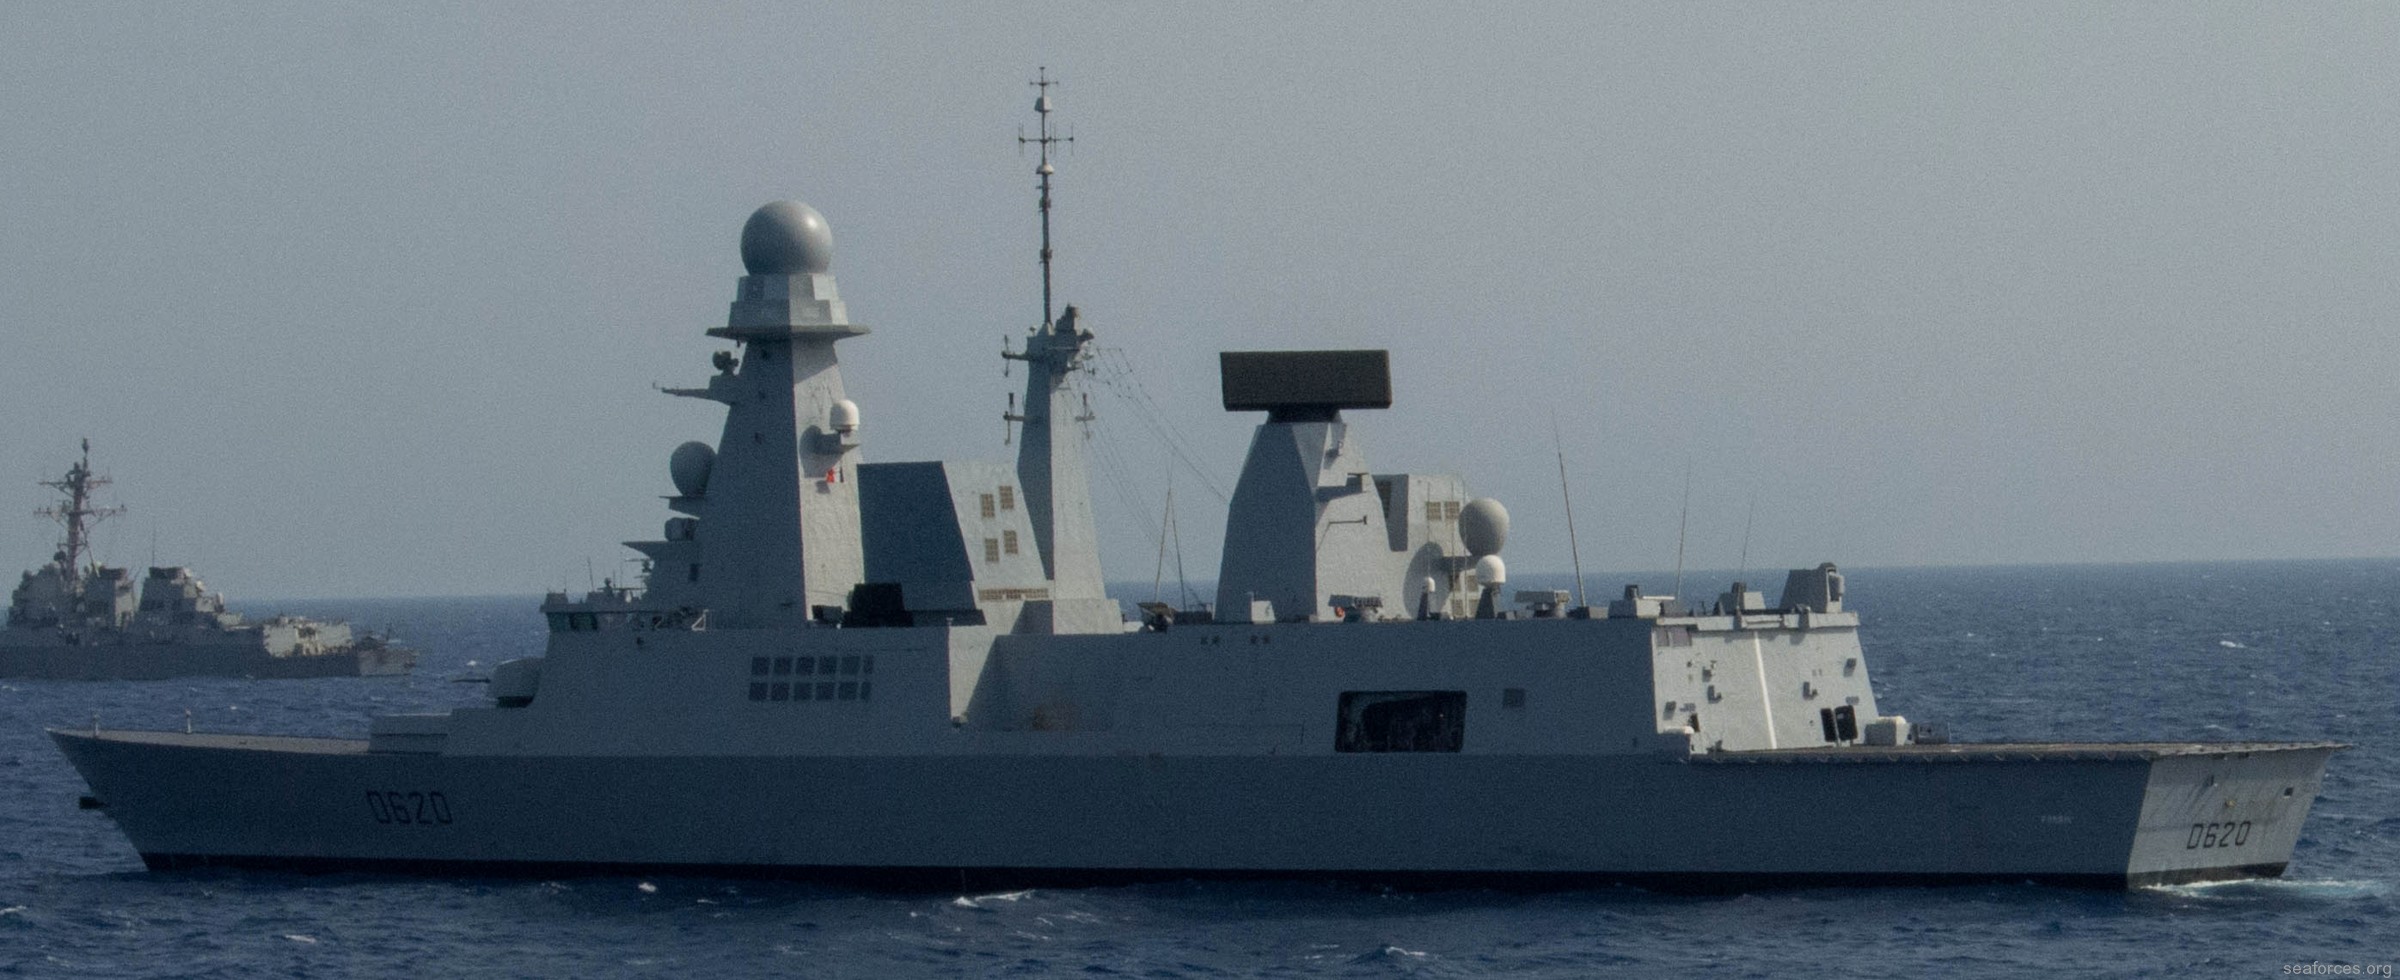 d-620 fs forbin horizon class guided missile frigate fregate anti-air-warfare aaw french navy marine nationale 02